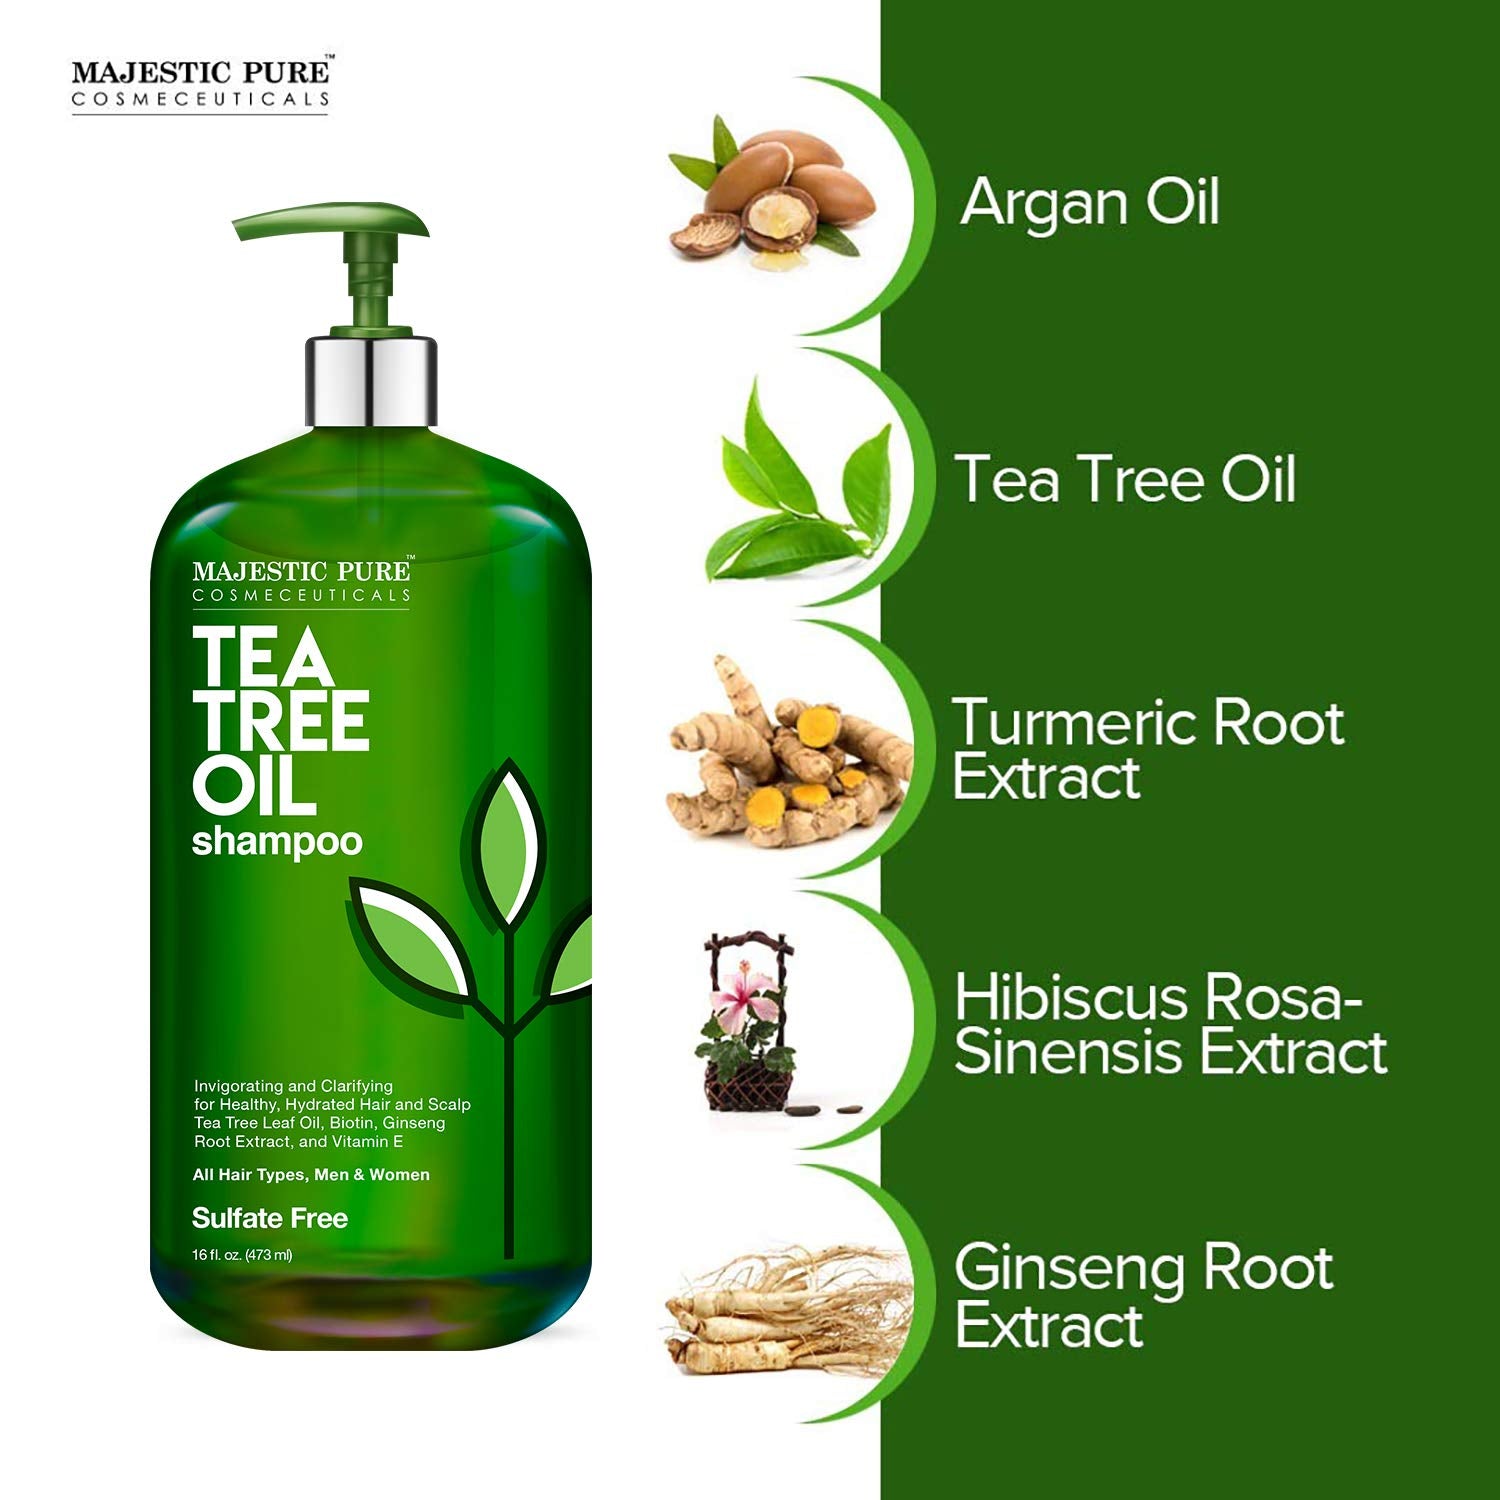 Tea Tree Shampoo for Men and Women -16 Fl Oz - Hydrating Formula Fights Dandruff, Lice and Itchy, Irritating or Dry Scalp - for All Hair Types - Sulfate Free